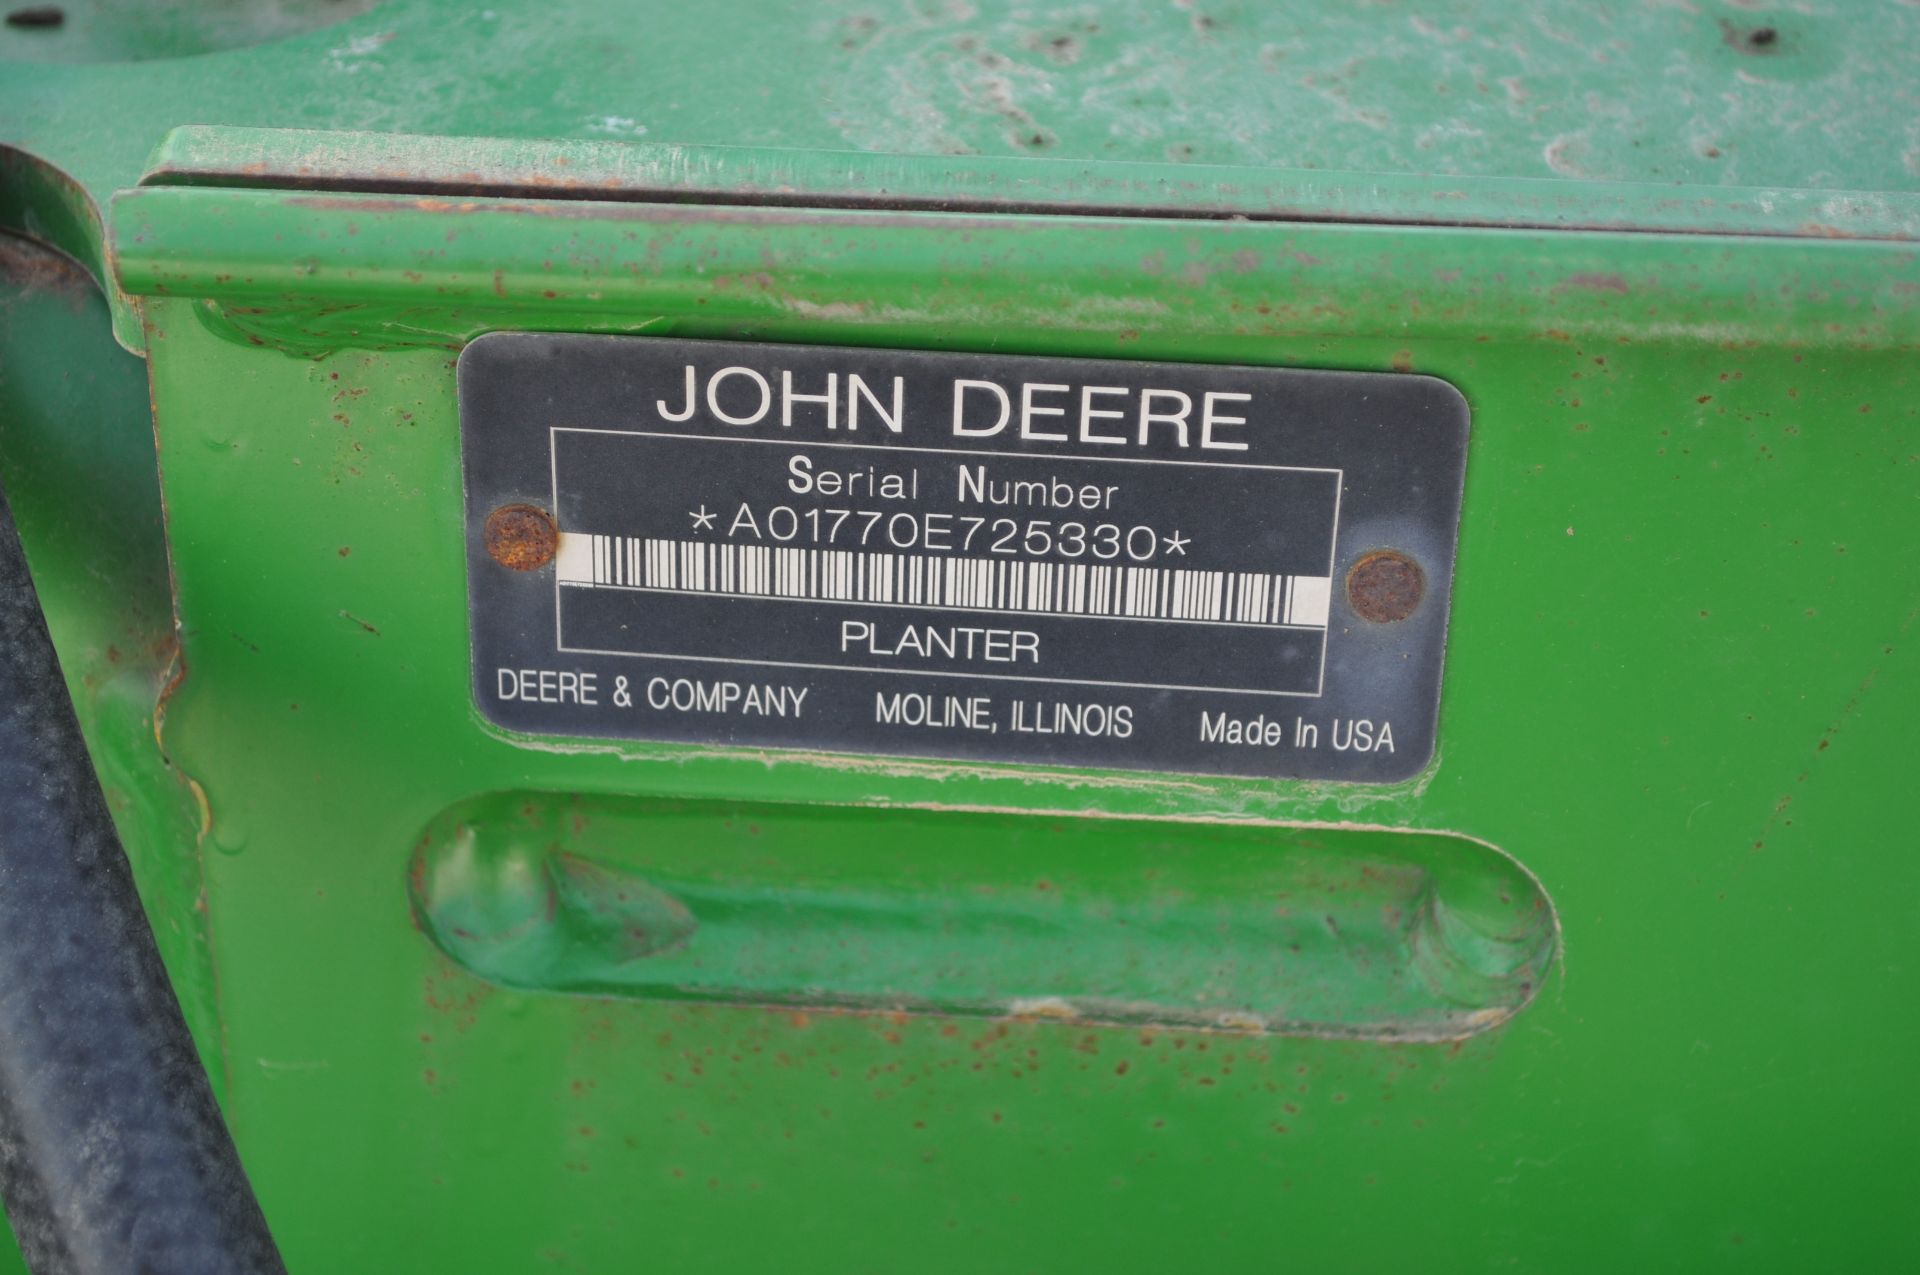 John Deere 1770 NT 24 row 30” planter, front fold, CCS, Refuge Plus tank, markers, no-till coulters, - Image 6 of 25